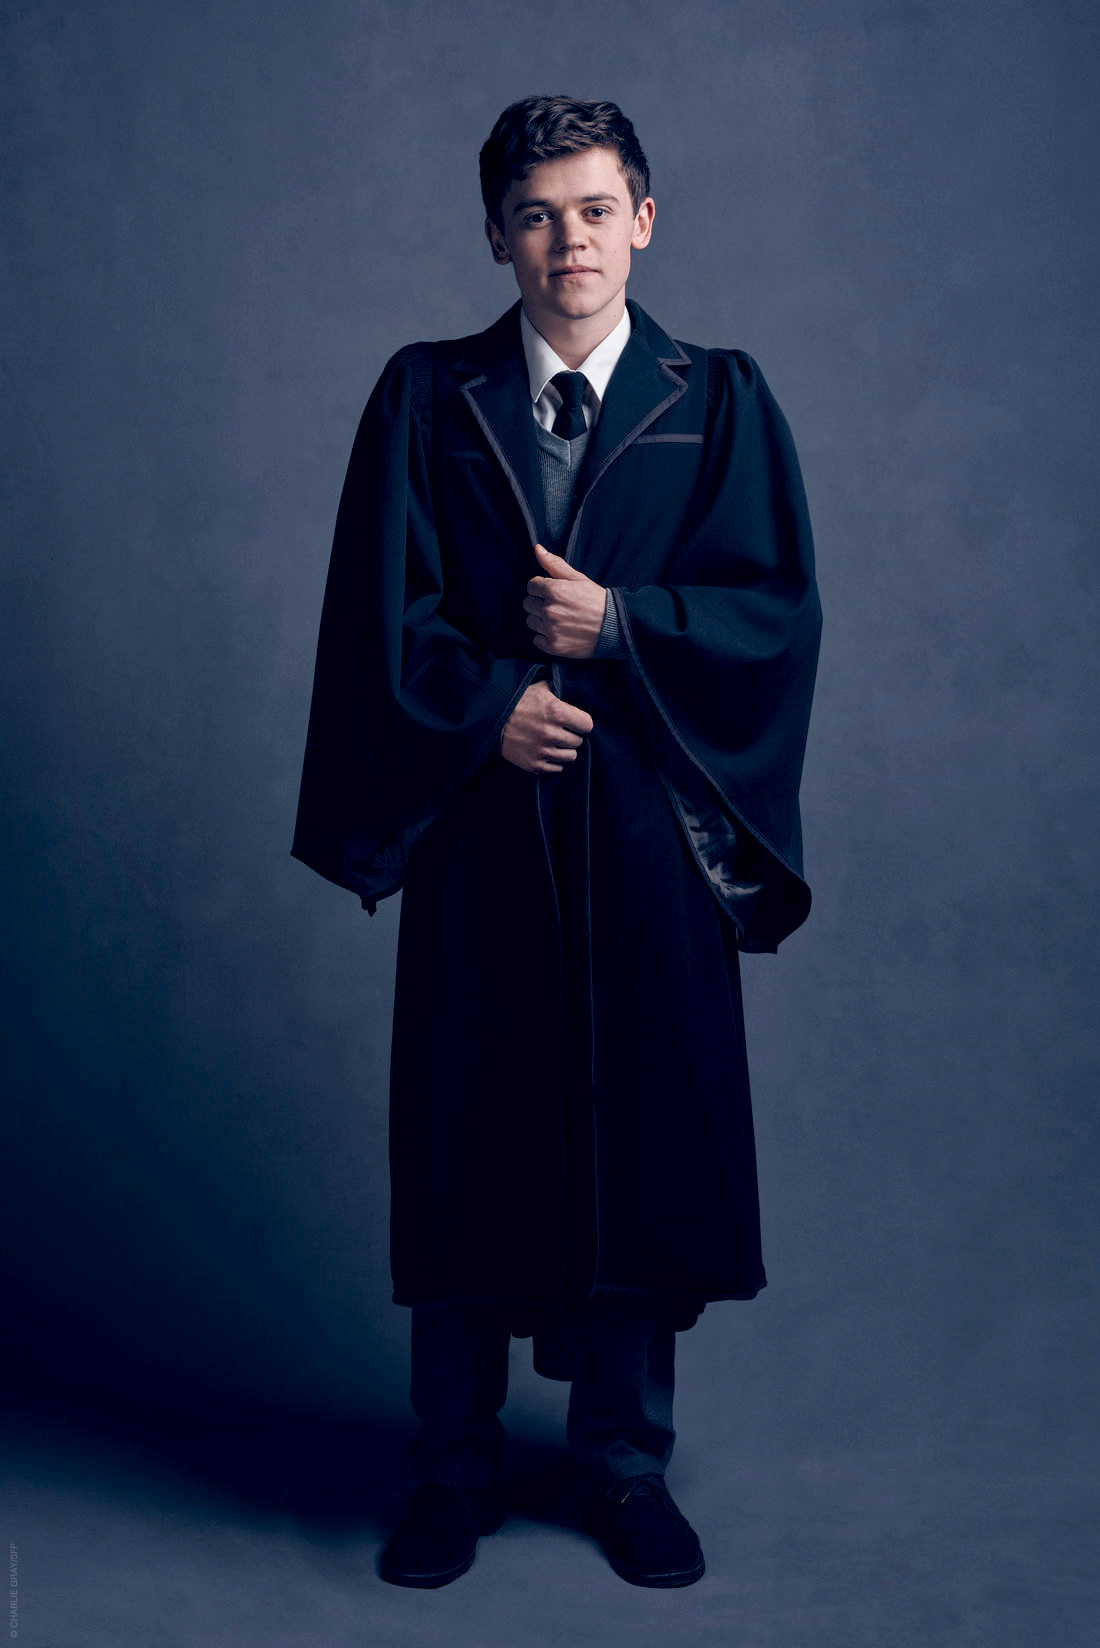 Harry Potter and the Cursed Child Albus Severus